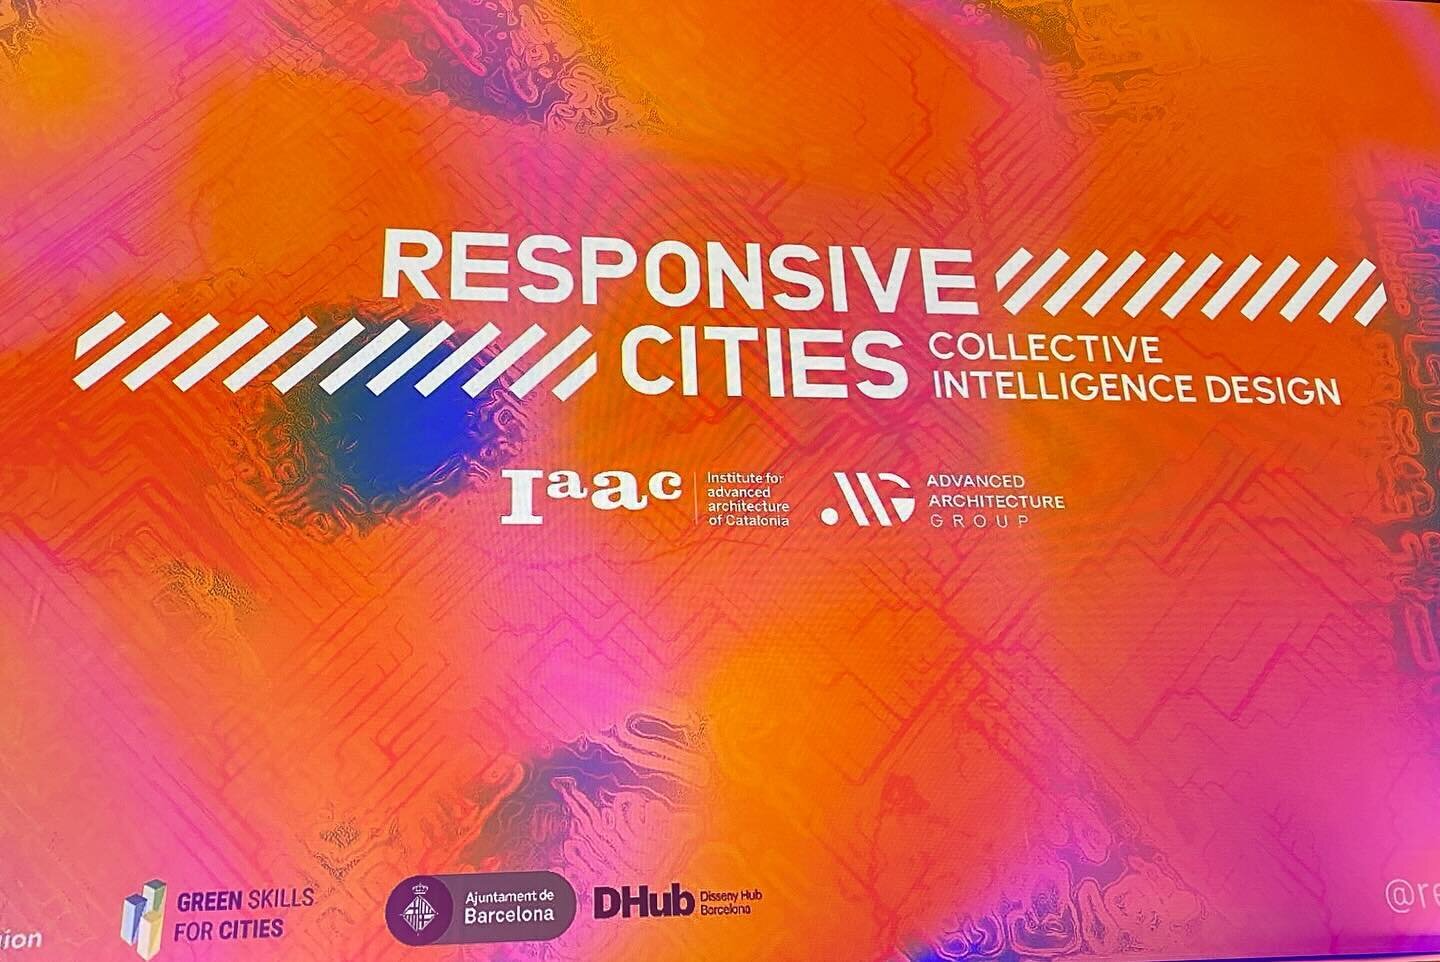 I enjoyed participating as a keynote speaker on the &ldquo;Interspecies Intelligence&rdquo; panel in the Responsive Cities Symposium on Collective Intelligence hosted by @iaacbcn at Dhub Barcelona. Amazing presentations and provocative discussions ab